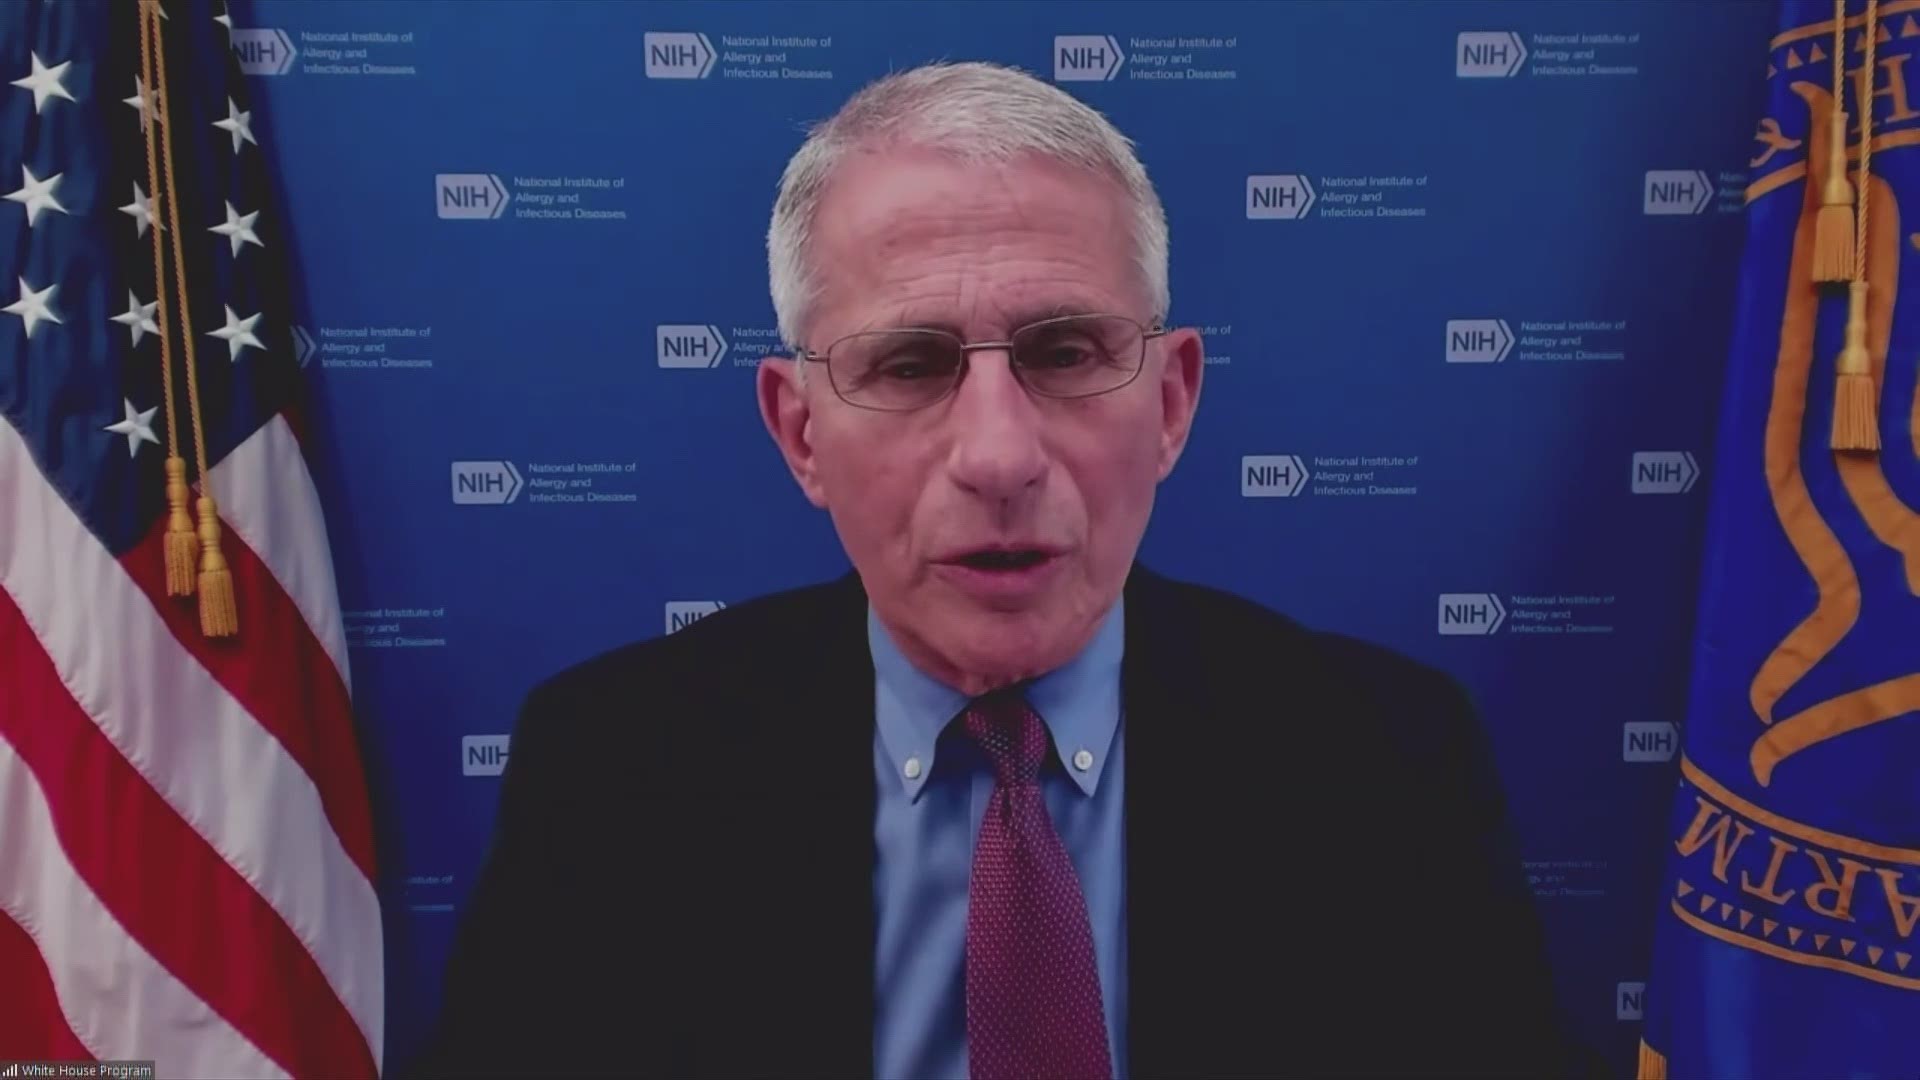 Dr. Anthony Fauci highlights the coronavirus variants and how to protect Americans with vaccines.